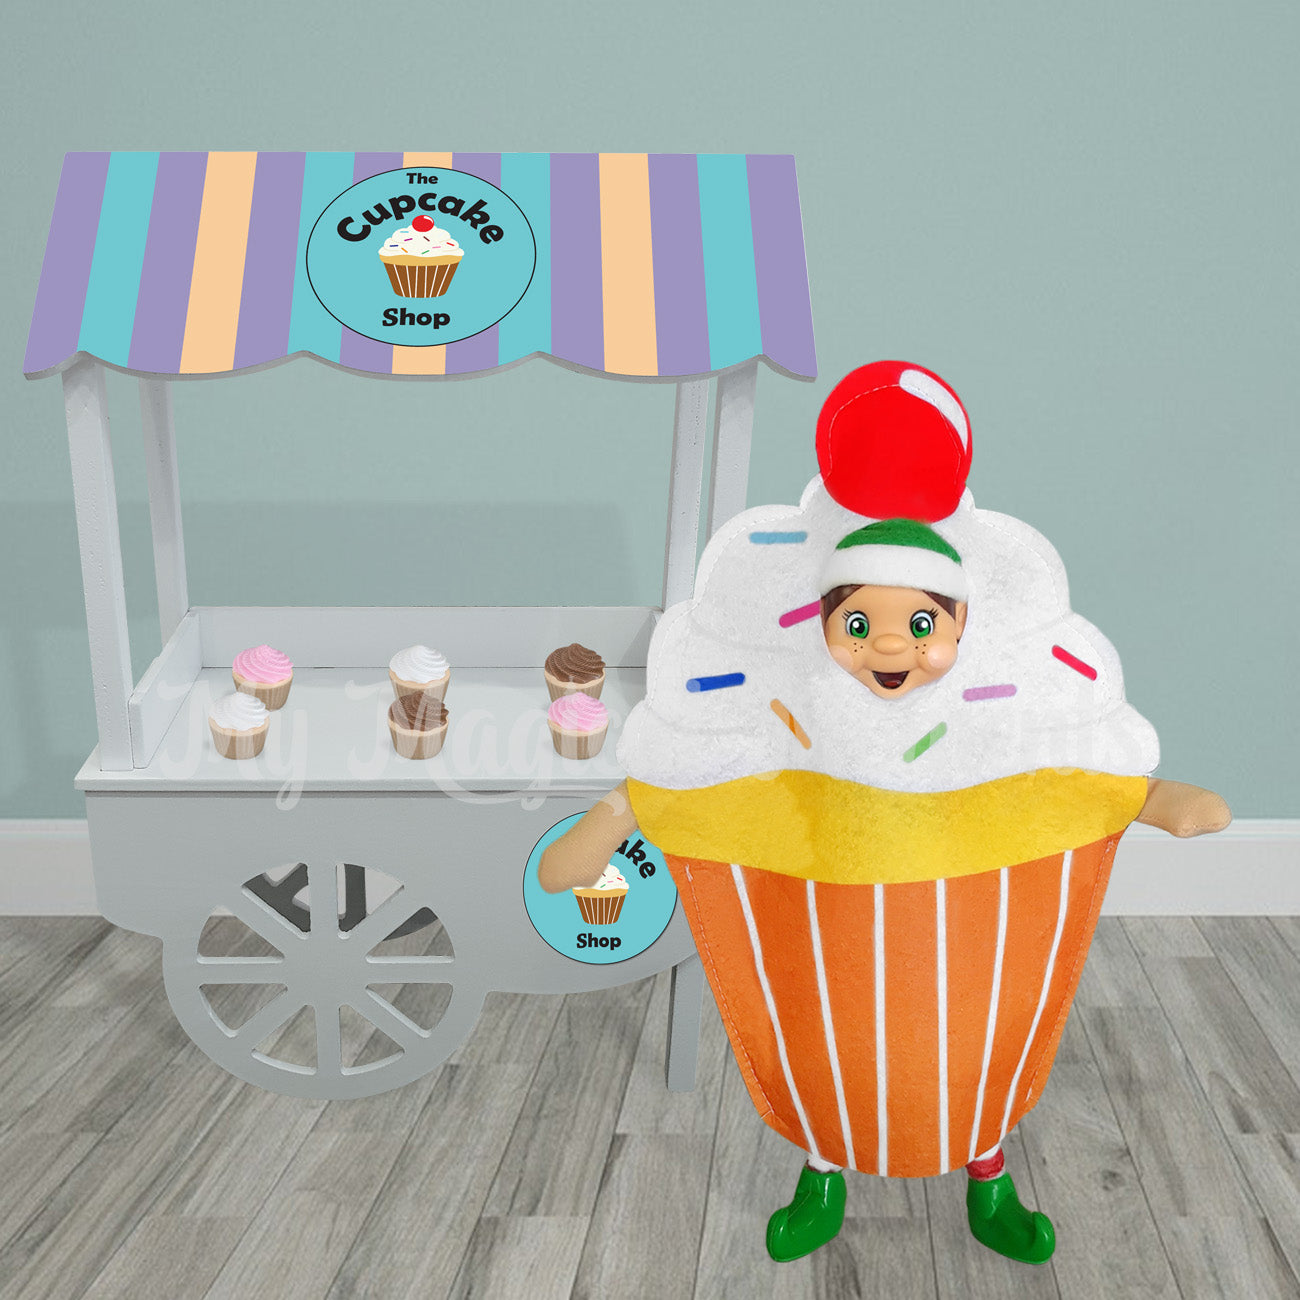 Elf dressed as a cupcake selling miniature cupcakes at her shop